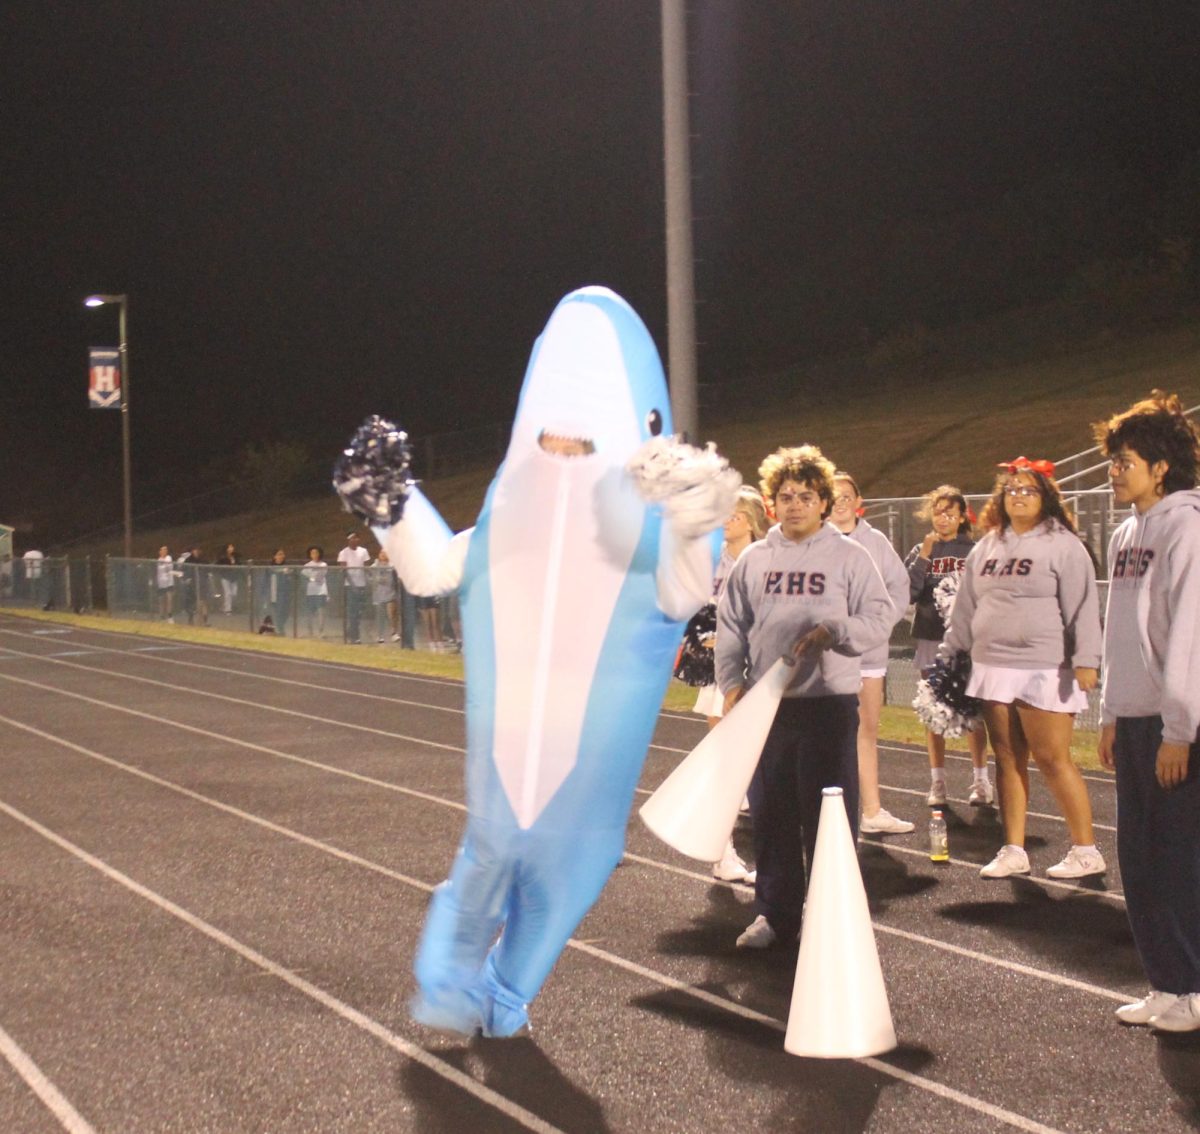 Freshman Addison Weakley runs around in a shark costume. There was about 20 students in the student section that night. “I did it to have fun and get people cheering,” Weakley said.
